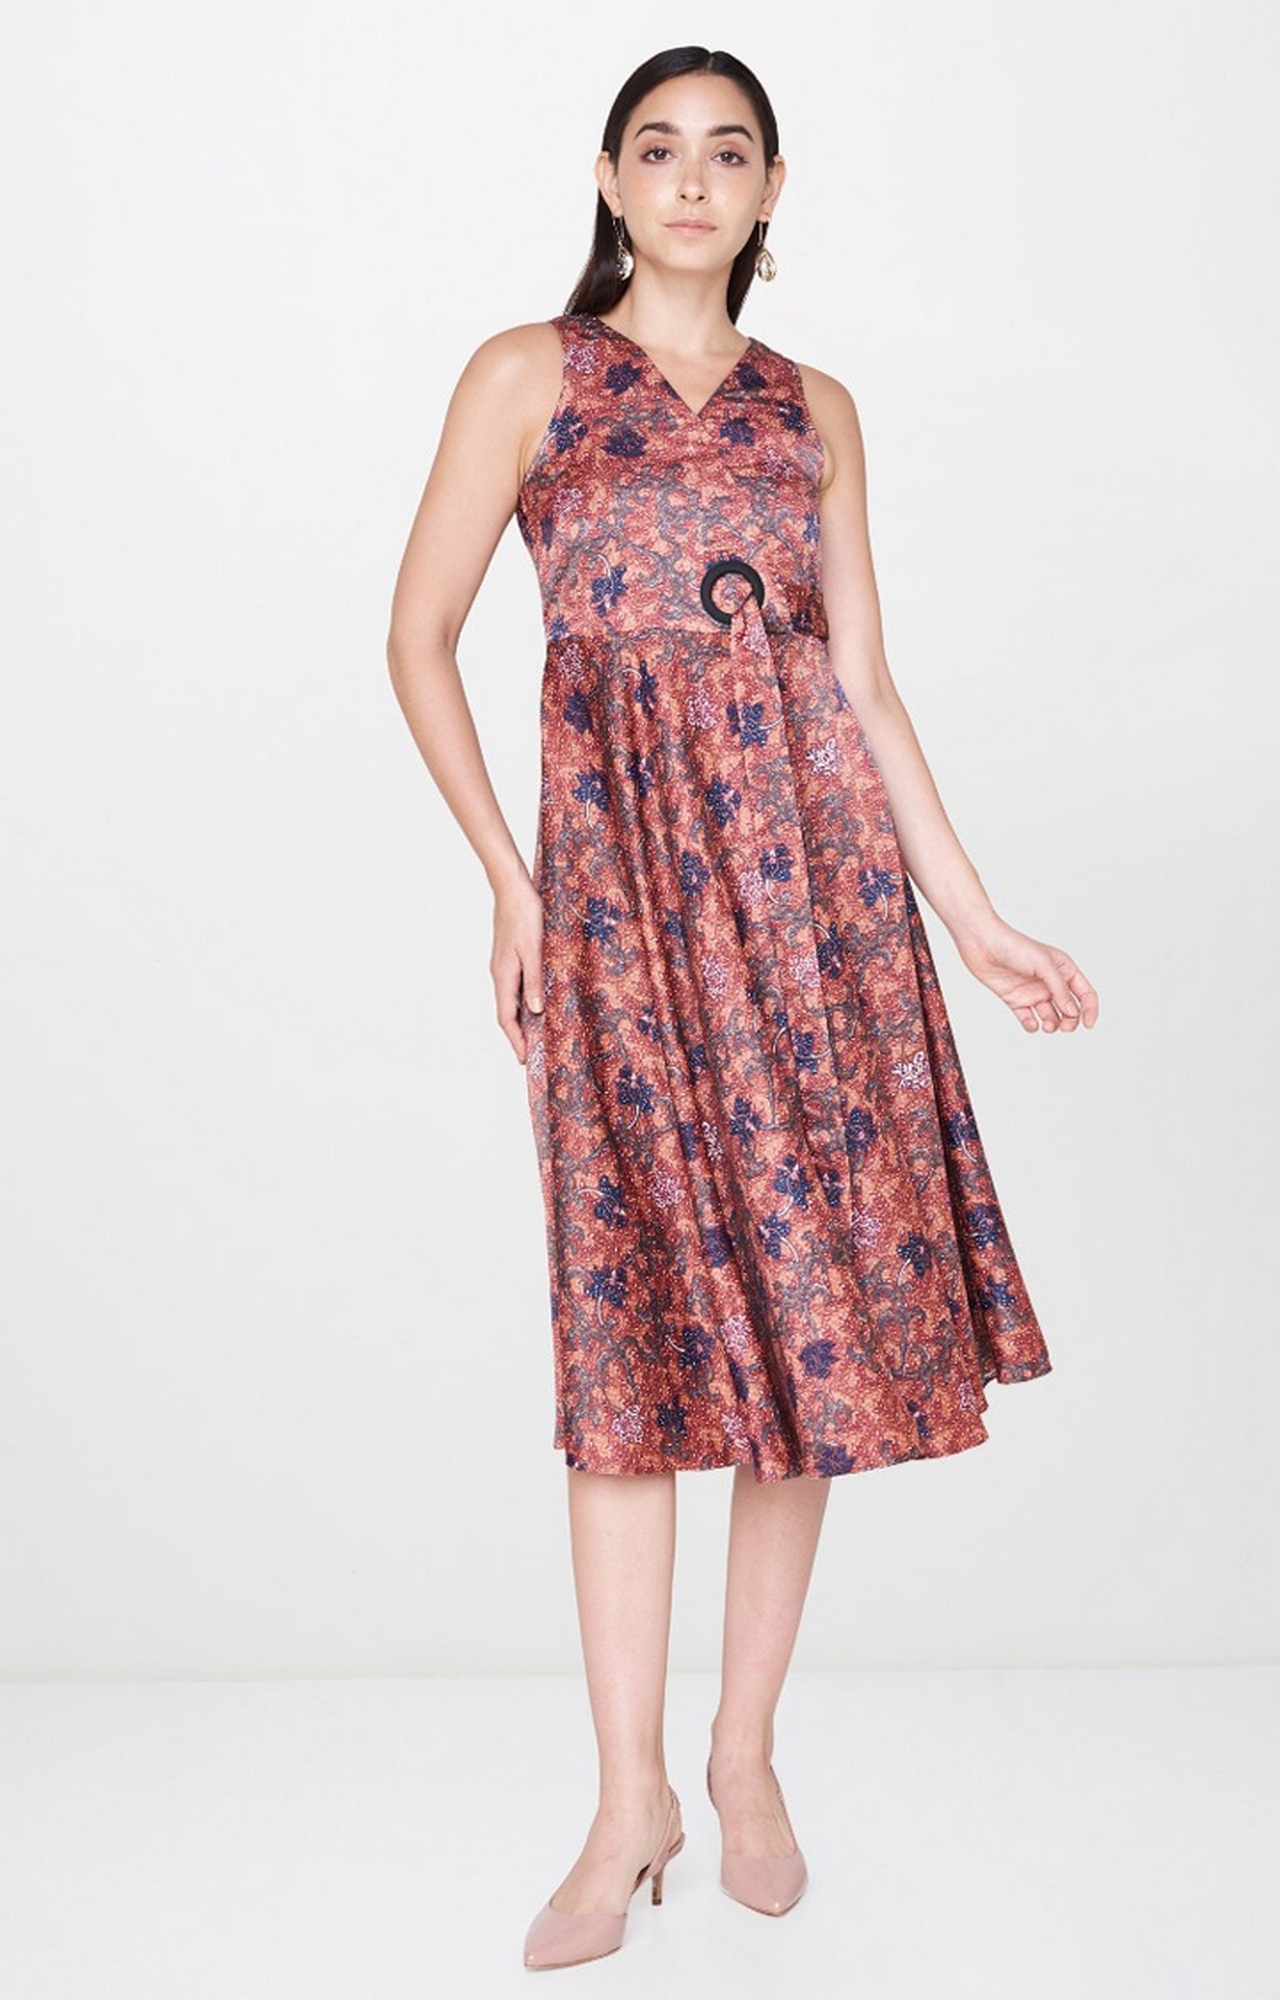 AND RUST DRESS